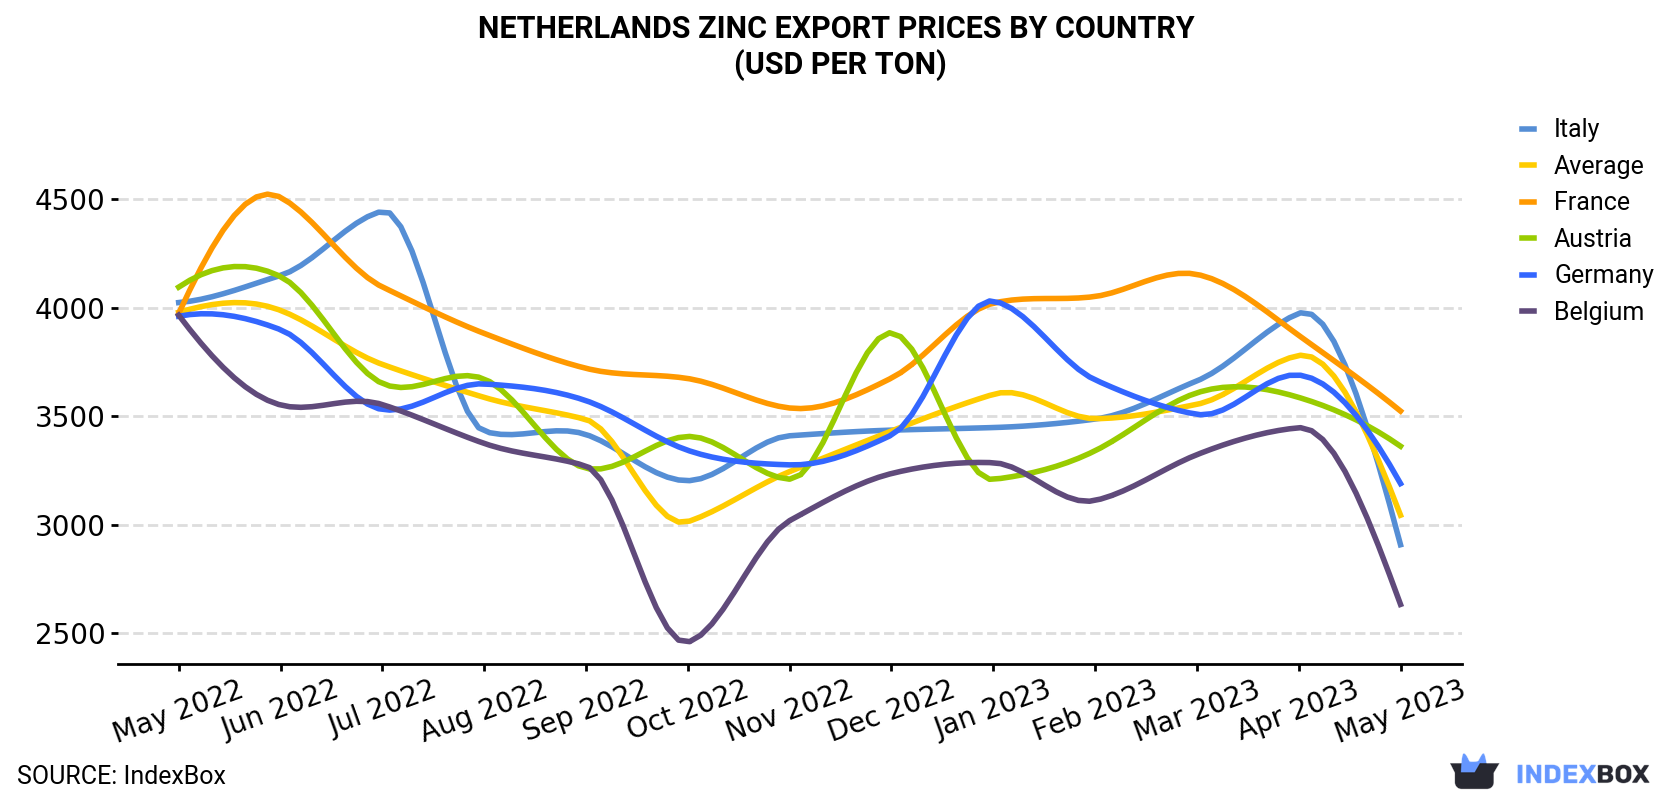 Netherlands Zinc Export Prices By Country (USD Per Ton)